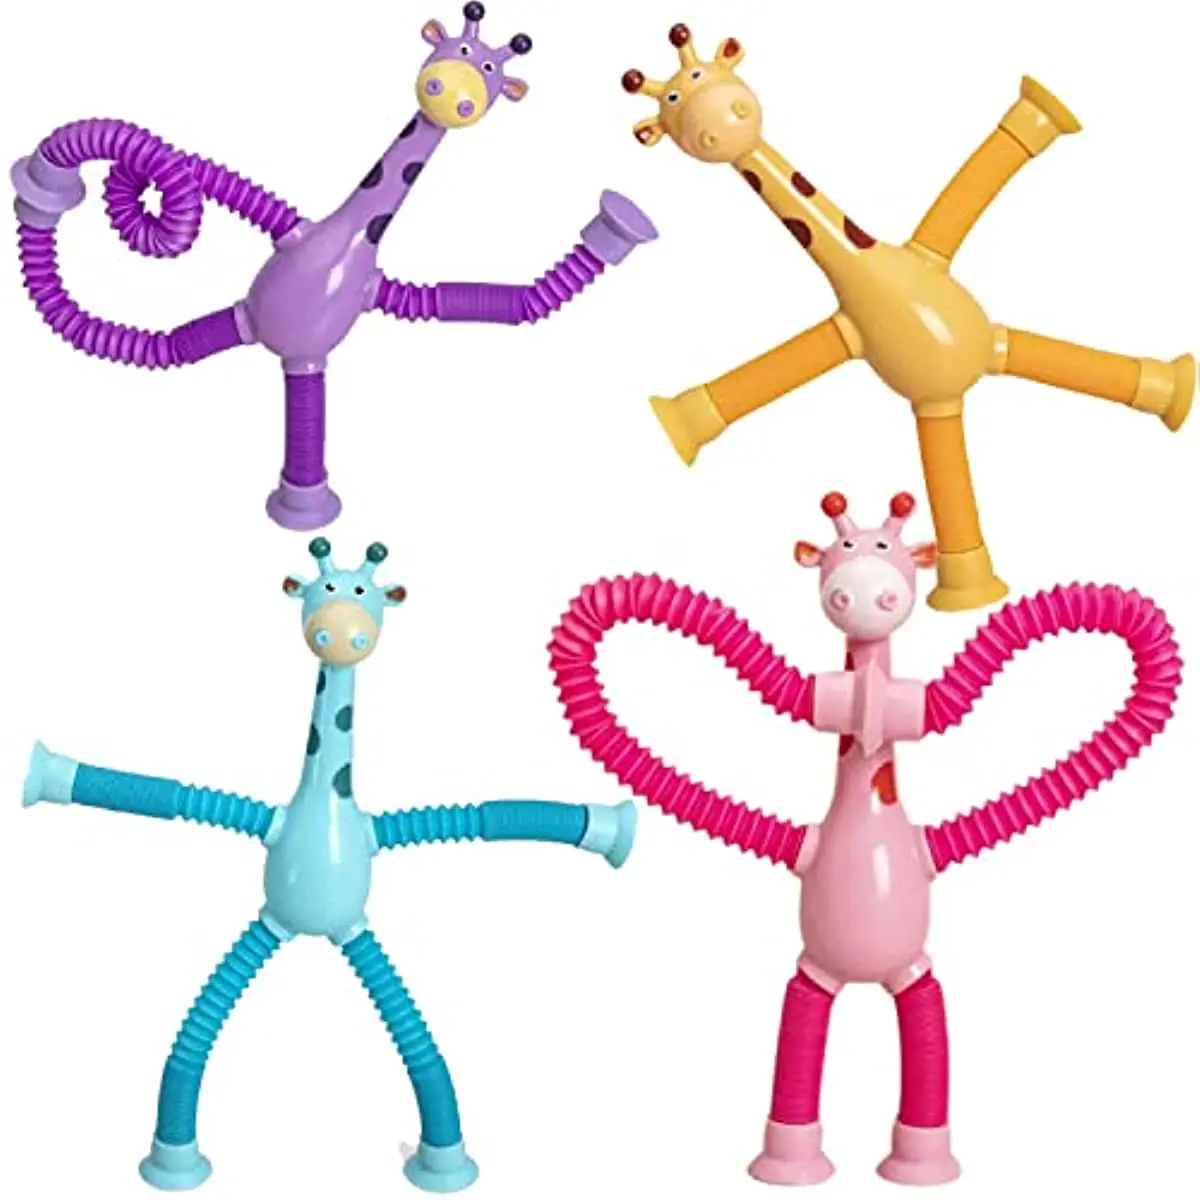 4 Pcs Telescopic Suction Cup Giraffe Toy Cartoon Puzzle Suction Cup Parent-Child Interactive Decompression Toy Stress Relief enlarge